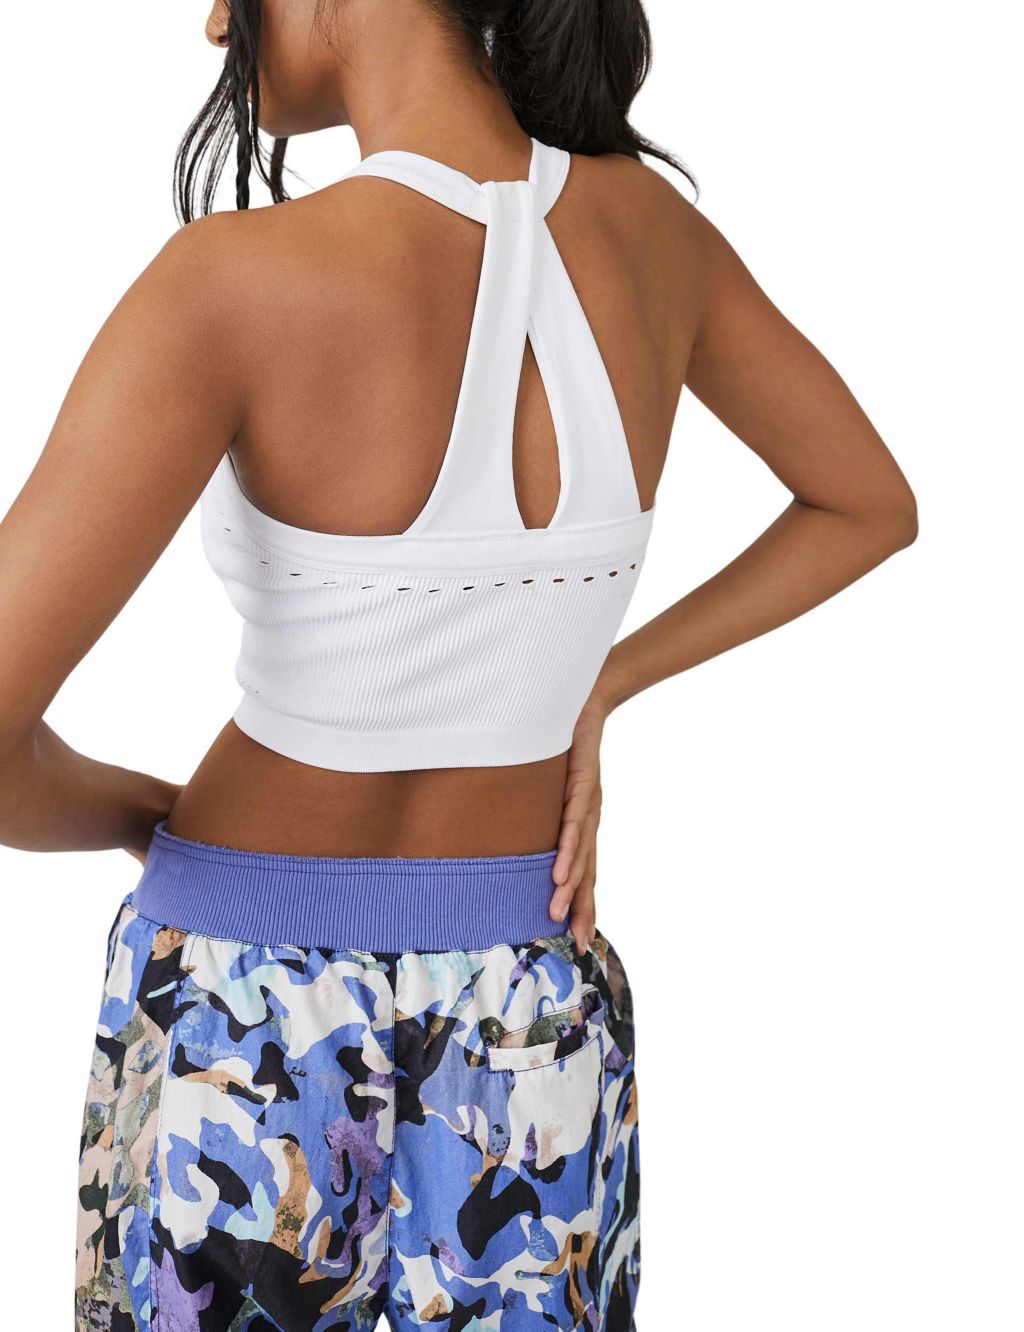 Serendipity Rib Knitted Twist Back Crop Top image 4